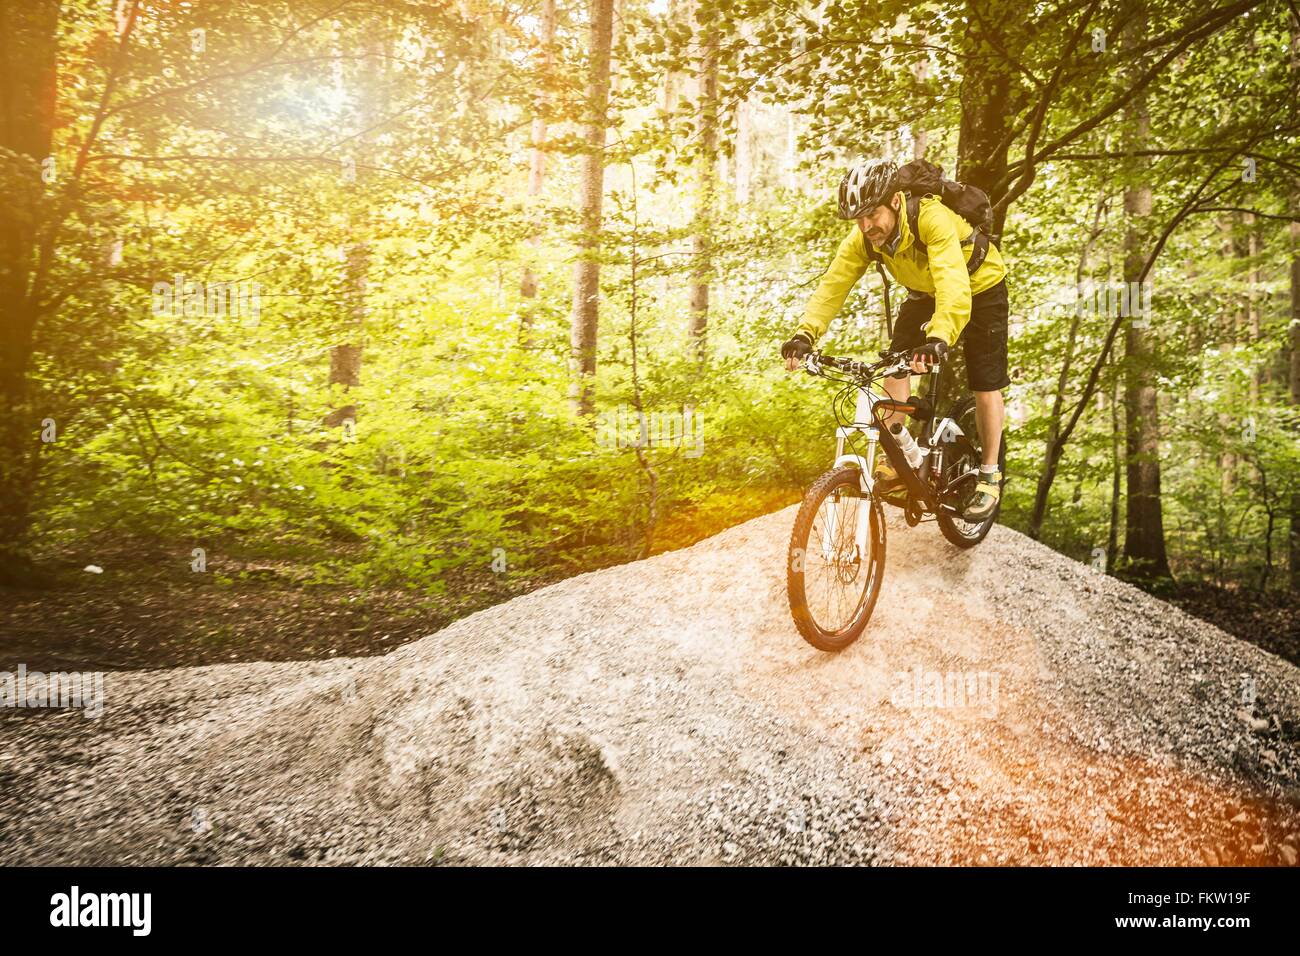 Mature male mountain biker cycling over mound in forest Stock Photo